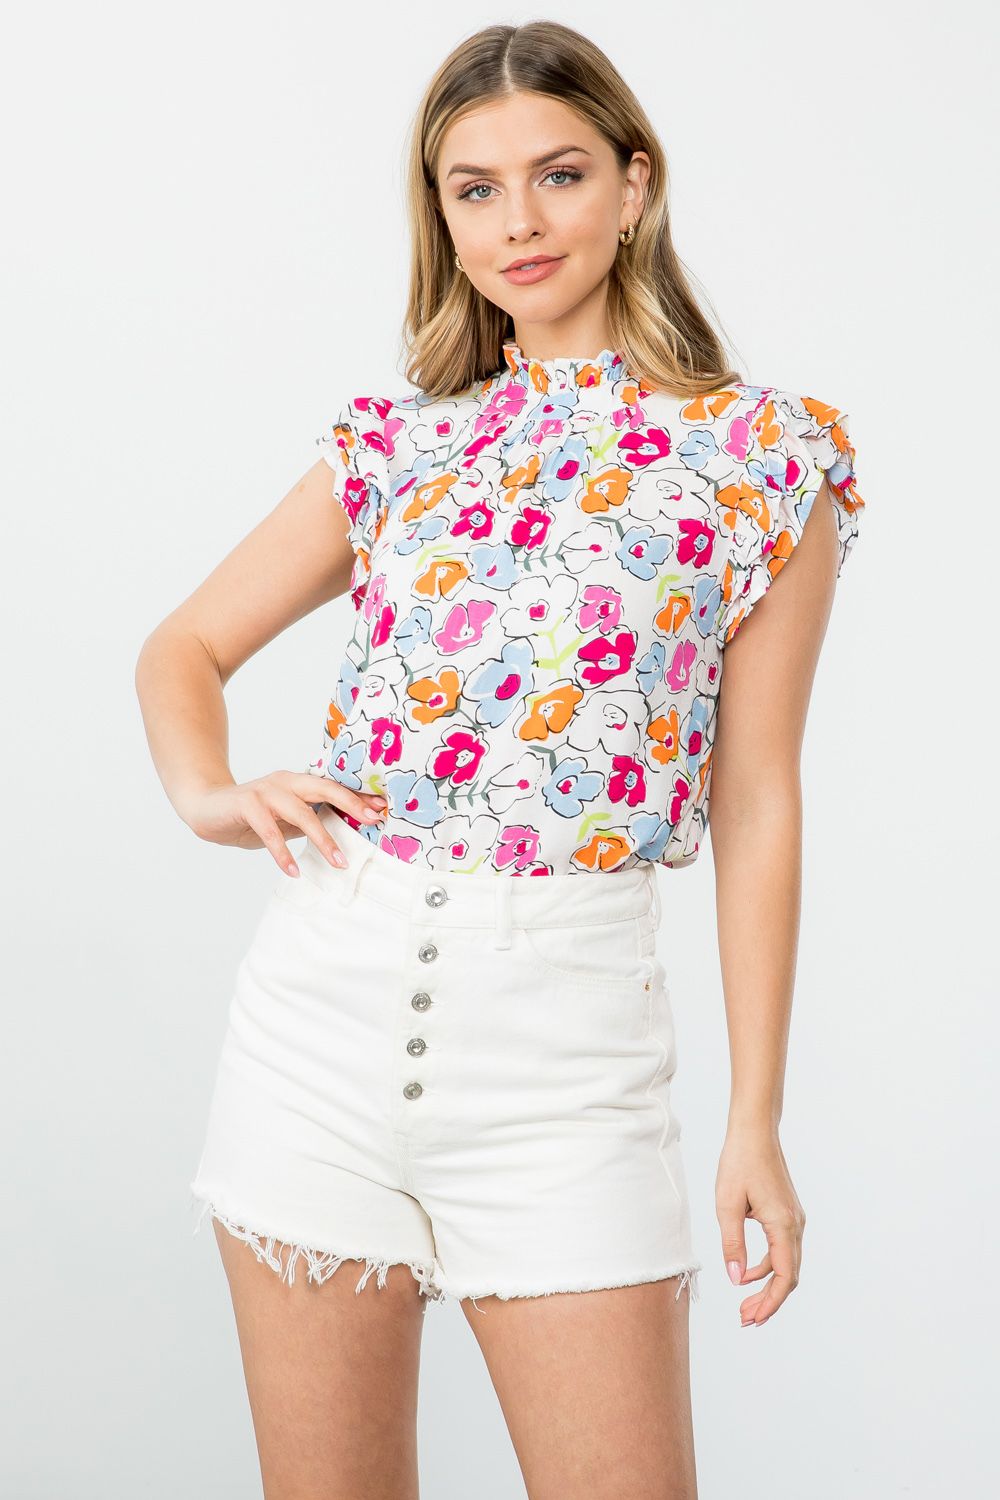 Lovely Me top. THML top. The BEST everyday top there is for SPRING!! This floral printed top is light-weight with ruffle sleeves. 